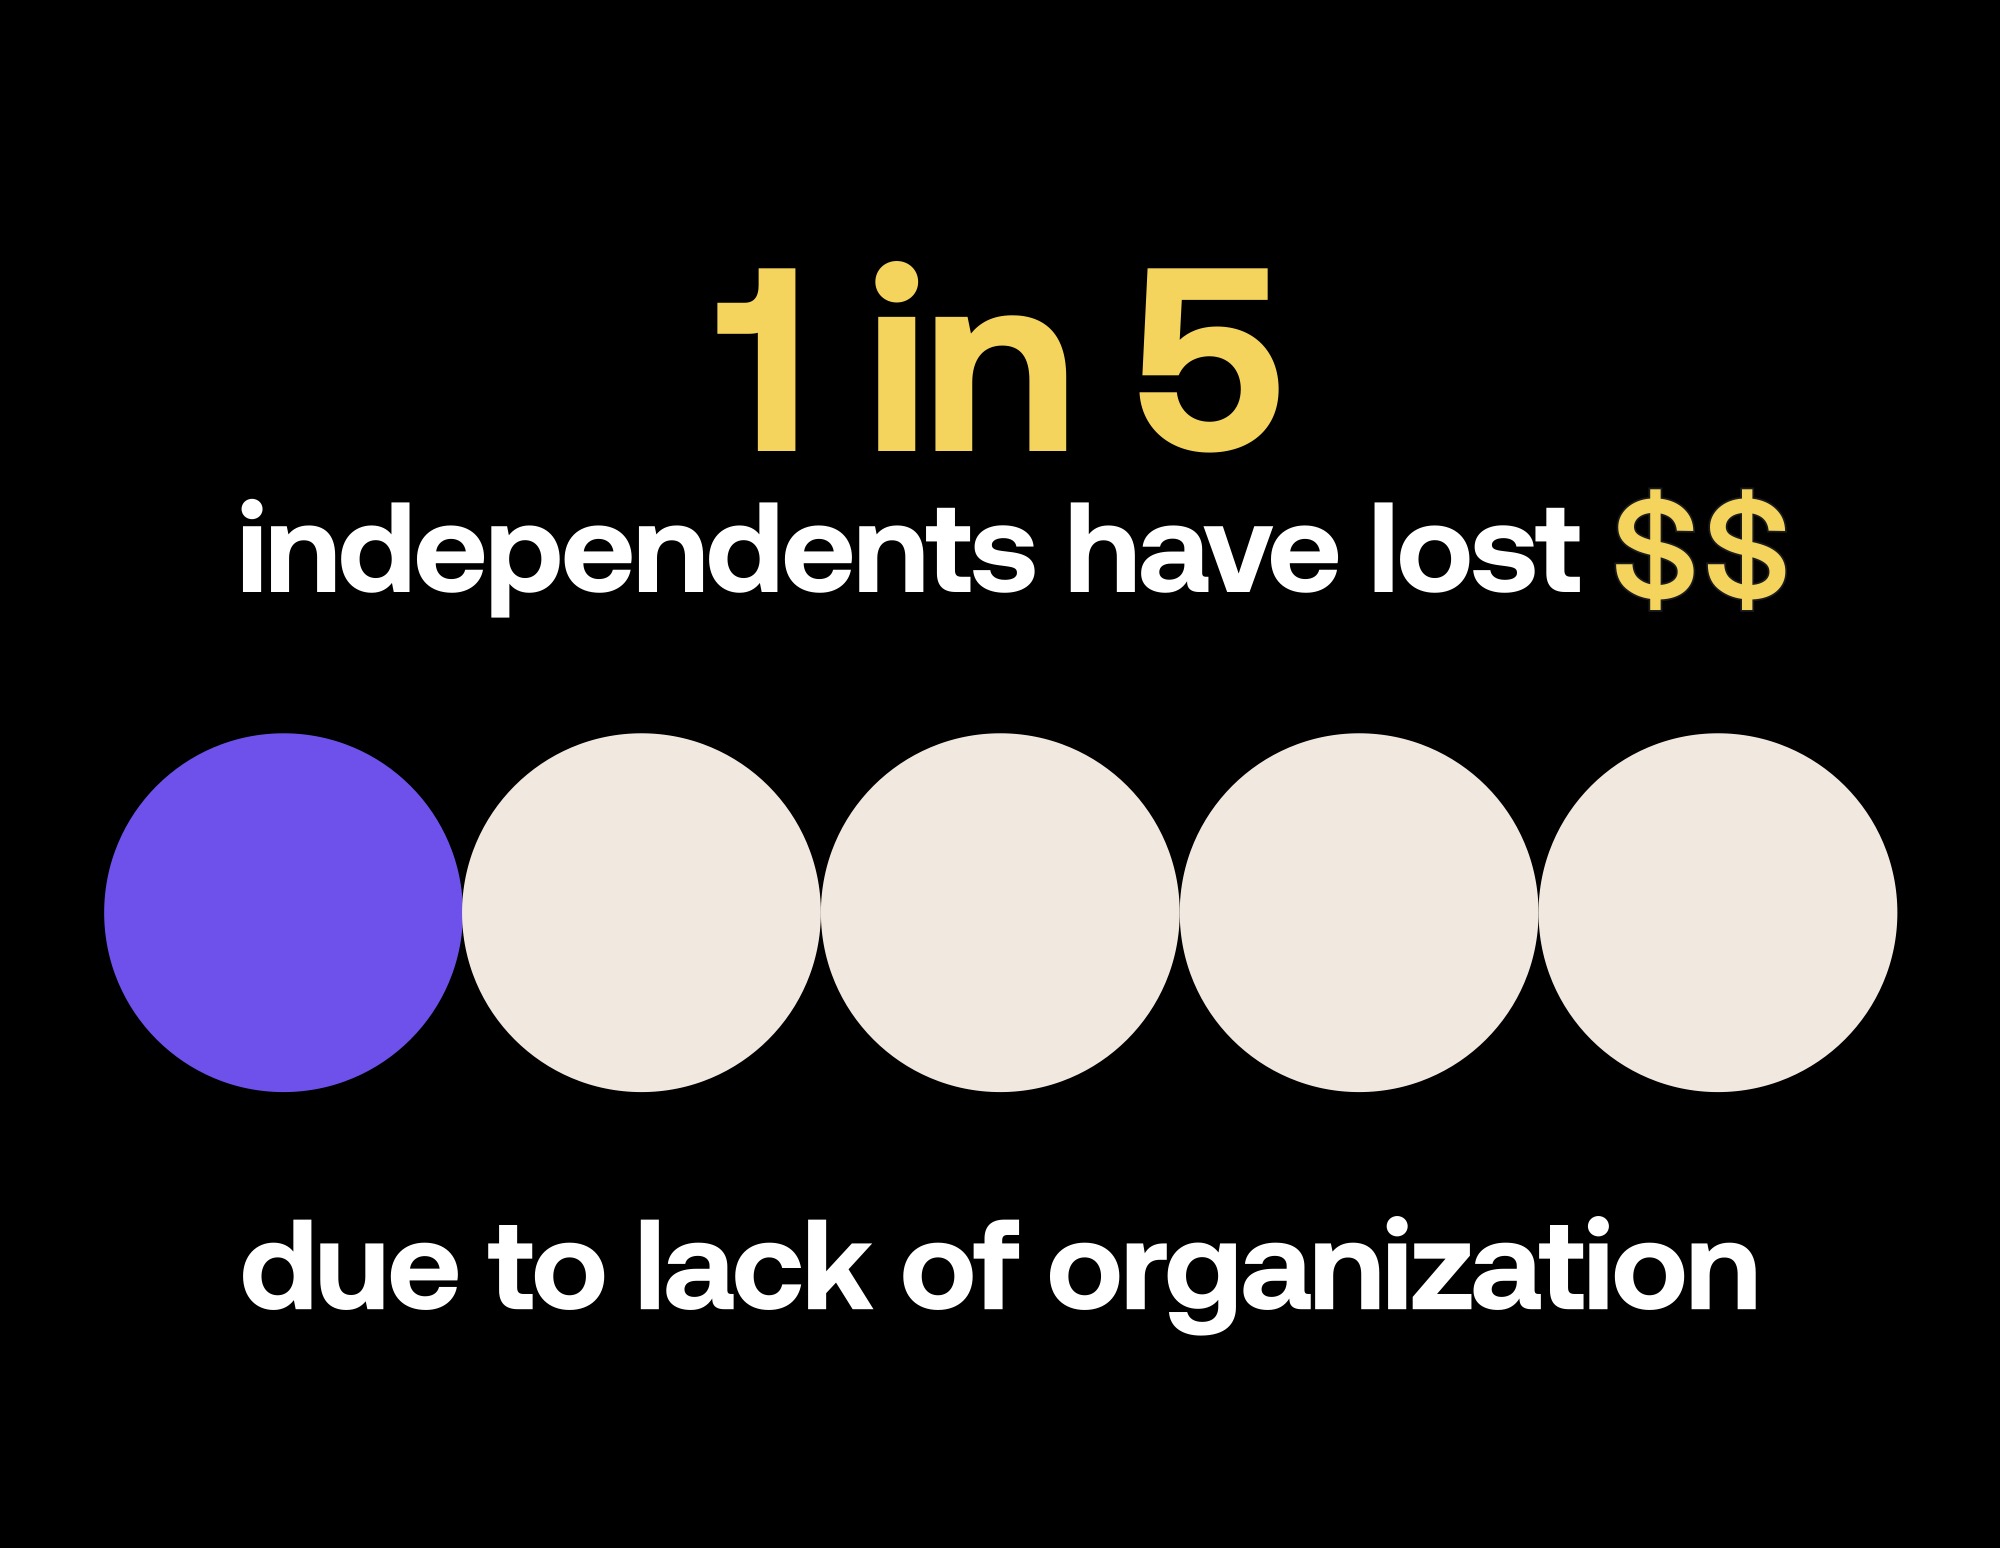 People lose money due to a lack in organization.